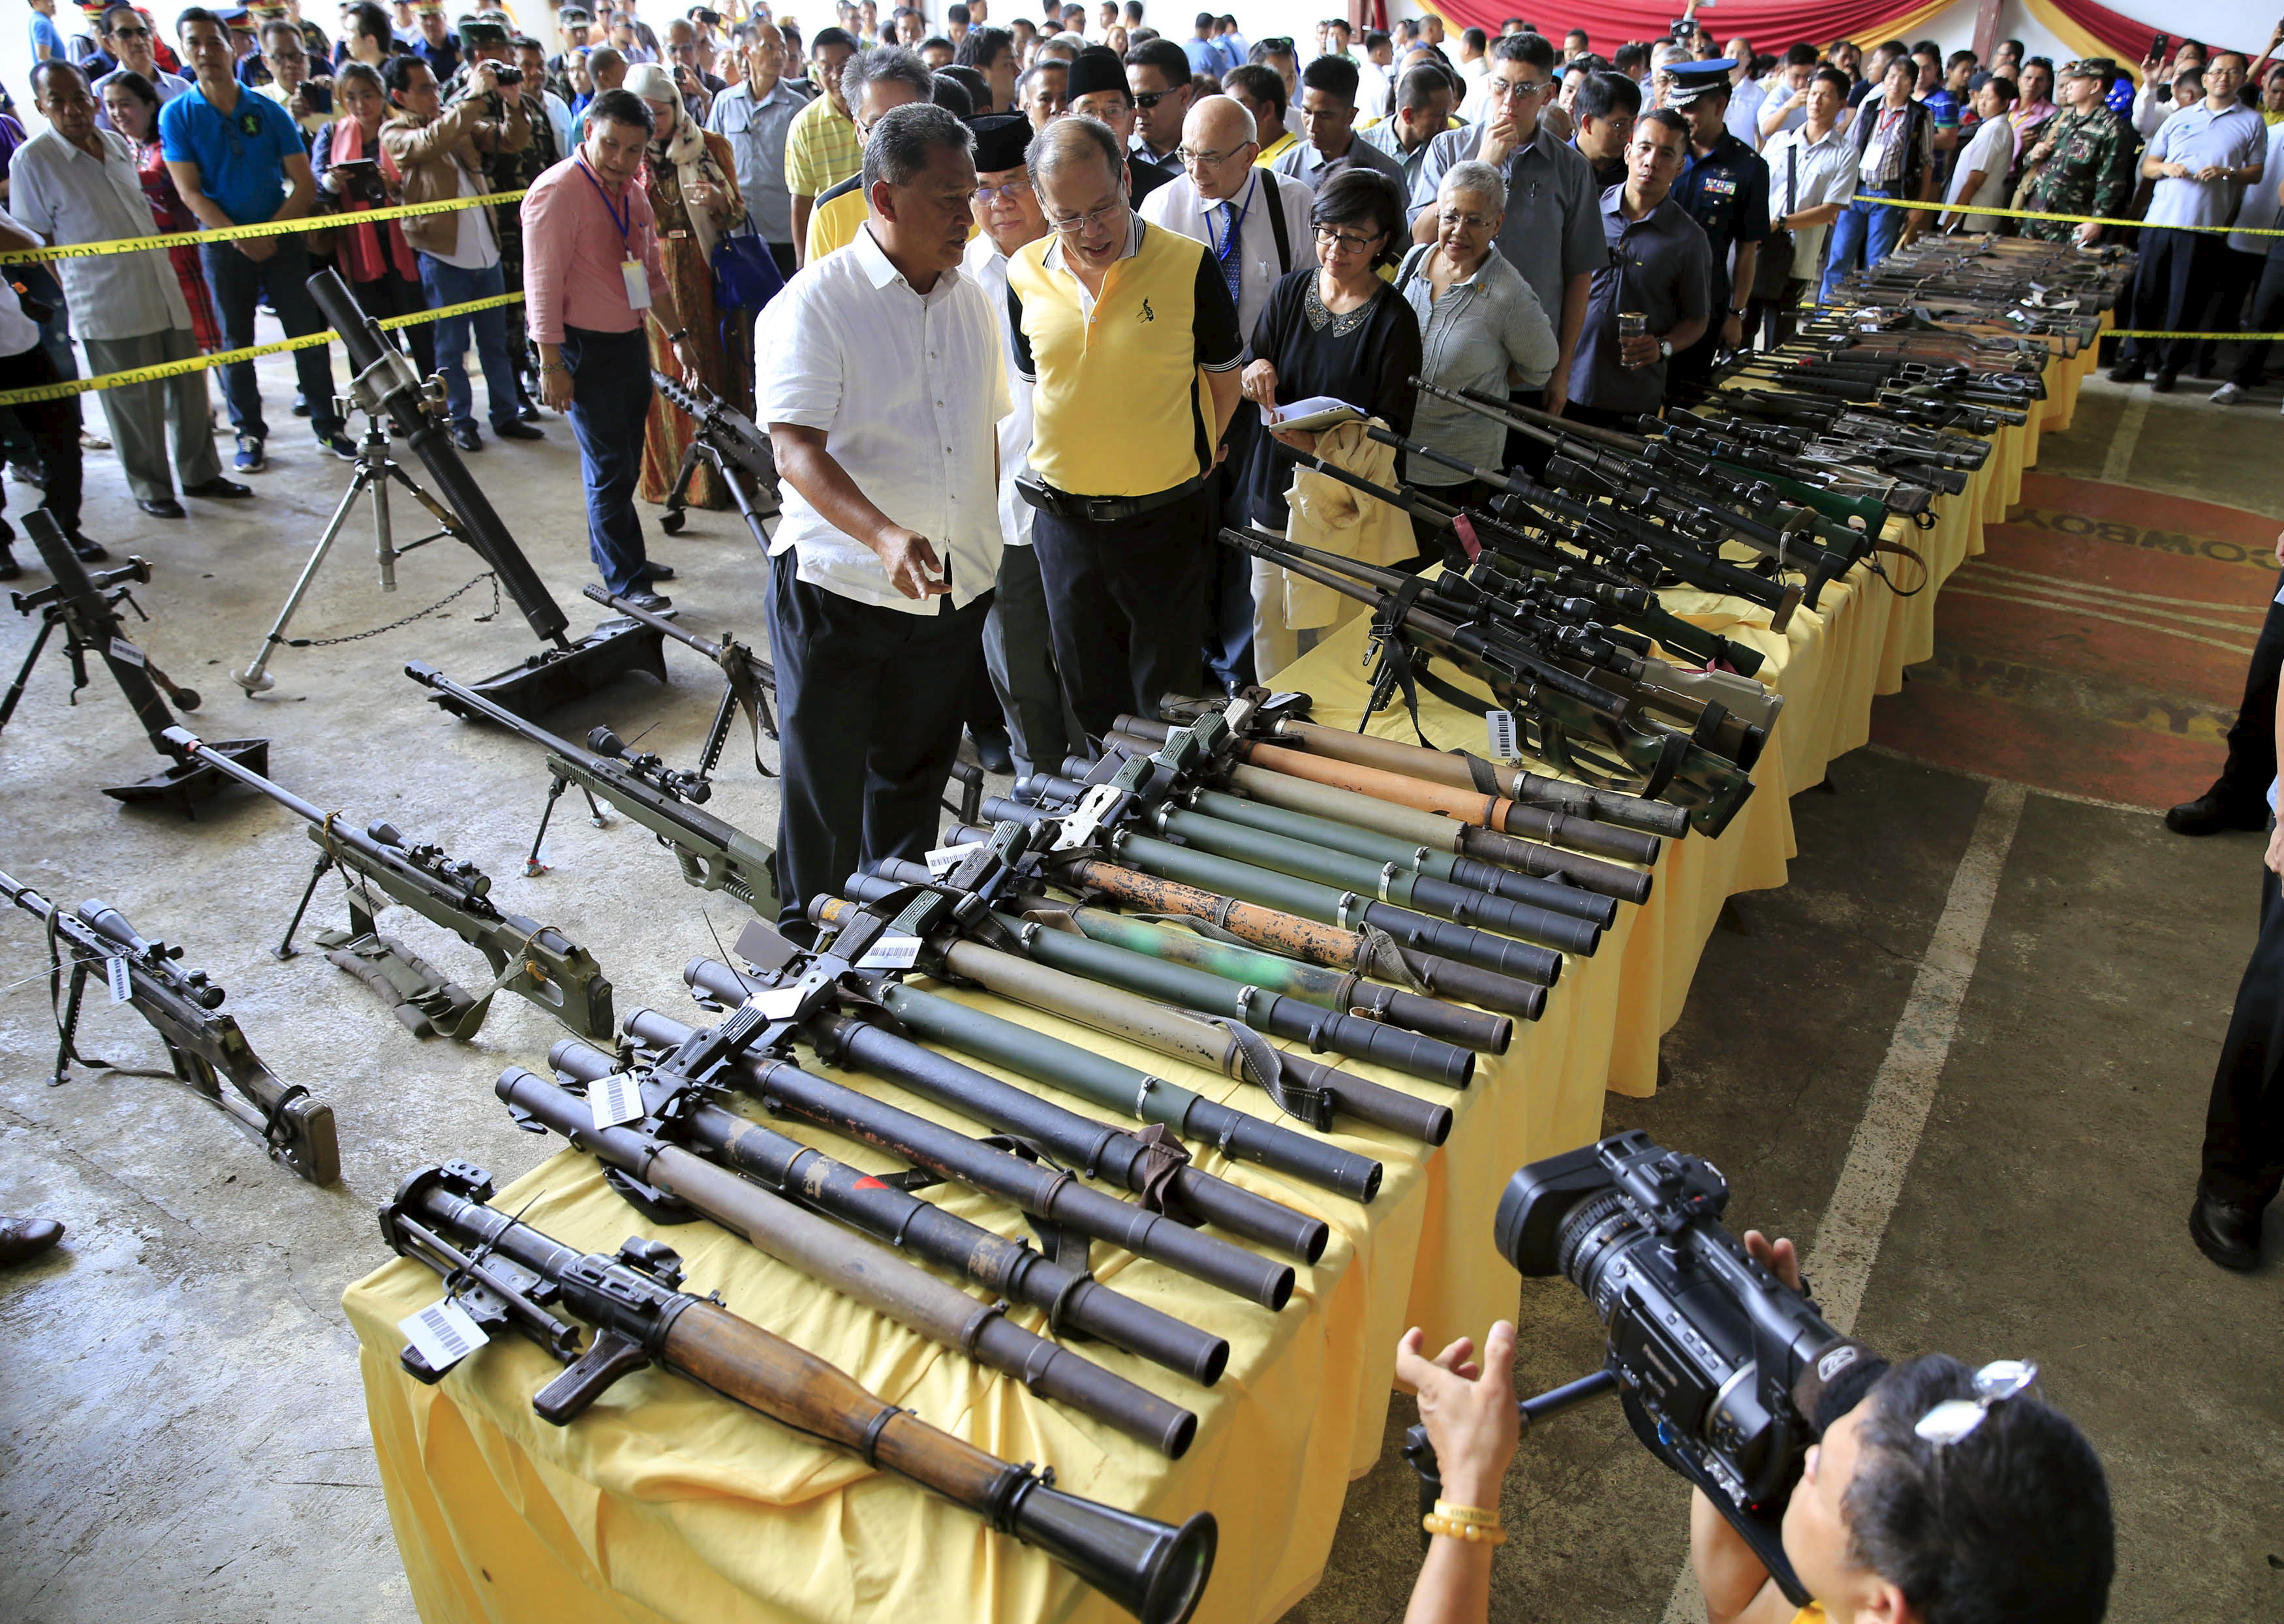 Philippine President Benigno Aquino (C) and Al-haj Murad Ebrahim (C, partially obscured), chairman of the Moro Islamic Liberation Front (MILF), look at weapons during the Ceremonial Turnover of Weapons and Decommissioning of MILF Combatants at the old capitol in Simuay town of Sultan Kudarat, Maguindanao province, southern Philippines June 16, 2015. Aquino attempted to revive a stalled peace process with Muslim insurgents on Tuesday, calling on lawmakers to grant autonomy for the predominantly Christian nation's restive southern region before time runs out. MILF handed in a token 75 weapons at the ceremony on Tuesday, where Aquino attempted to push forward his autonomy proposal for the region, known as Bangsamoro.     REUTERS/Romeo Ranoco